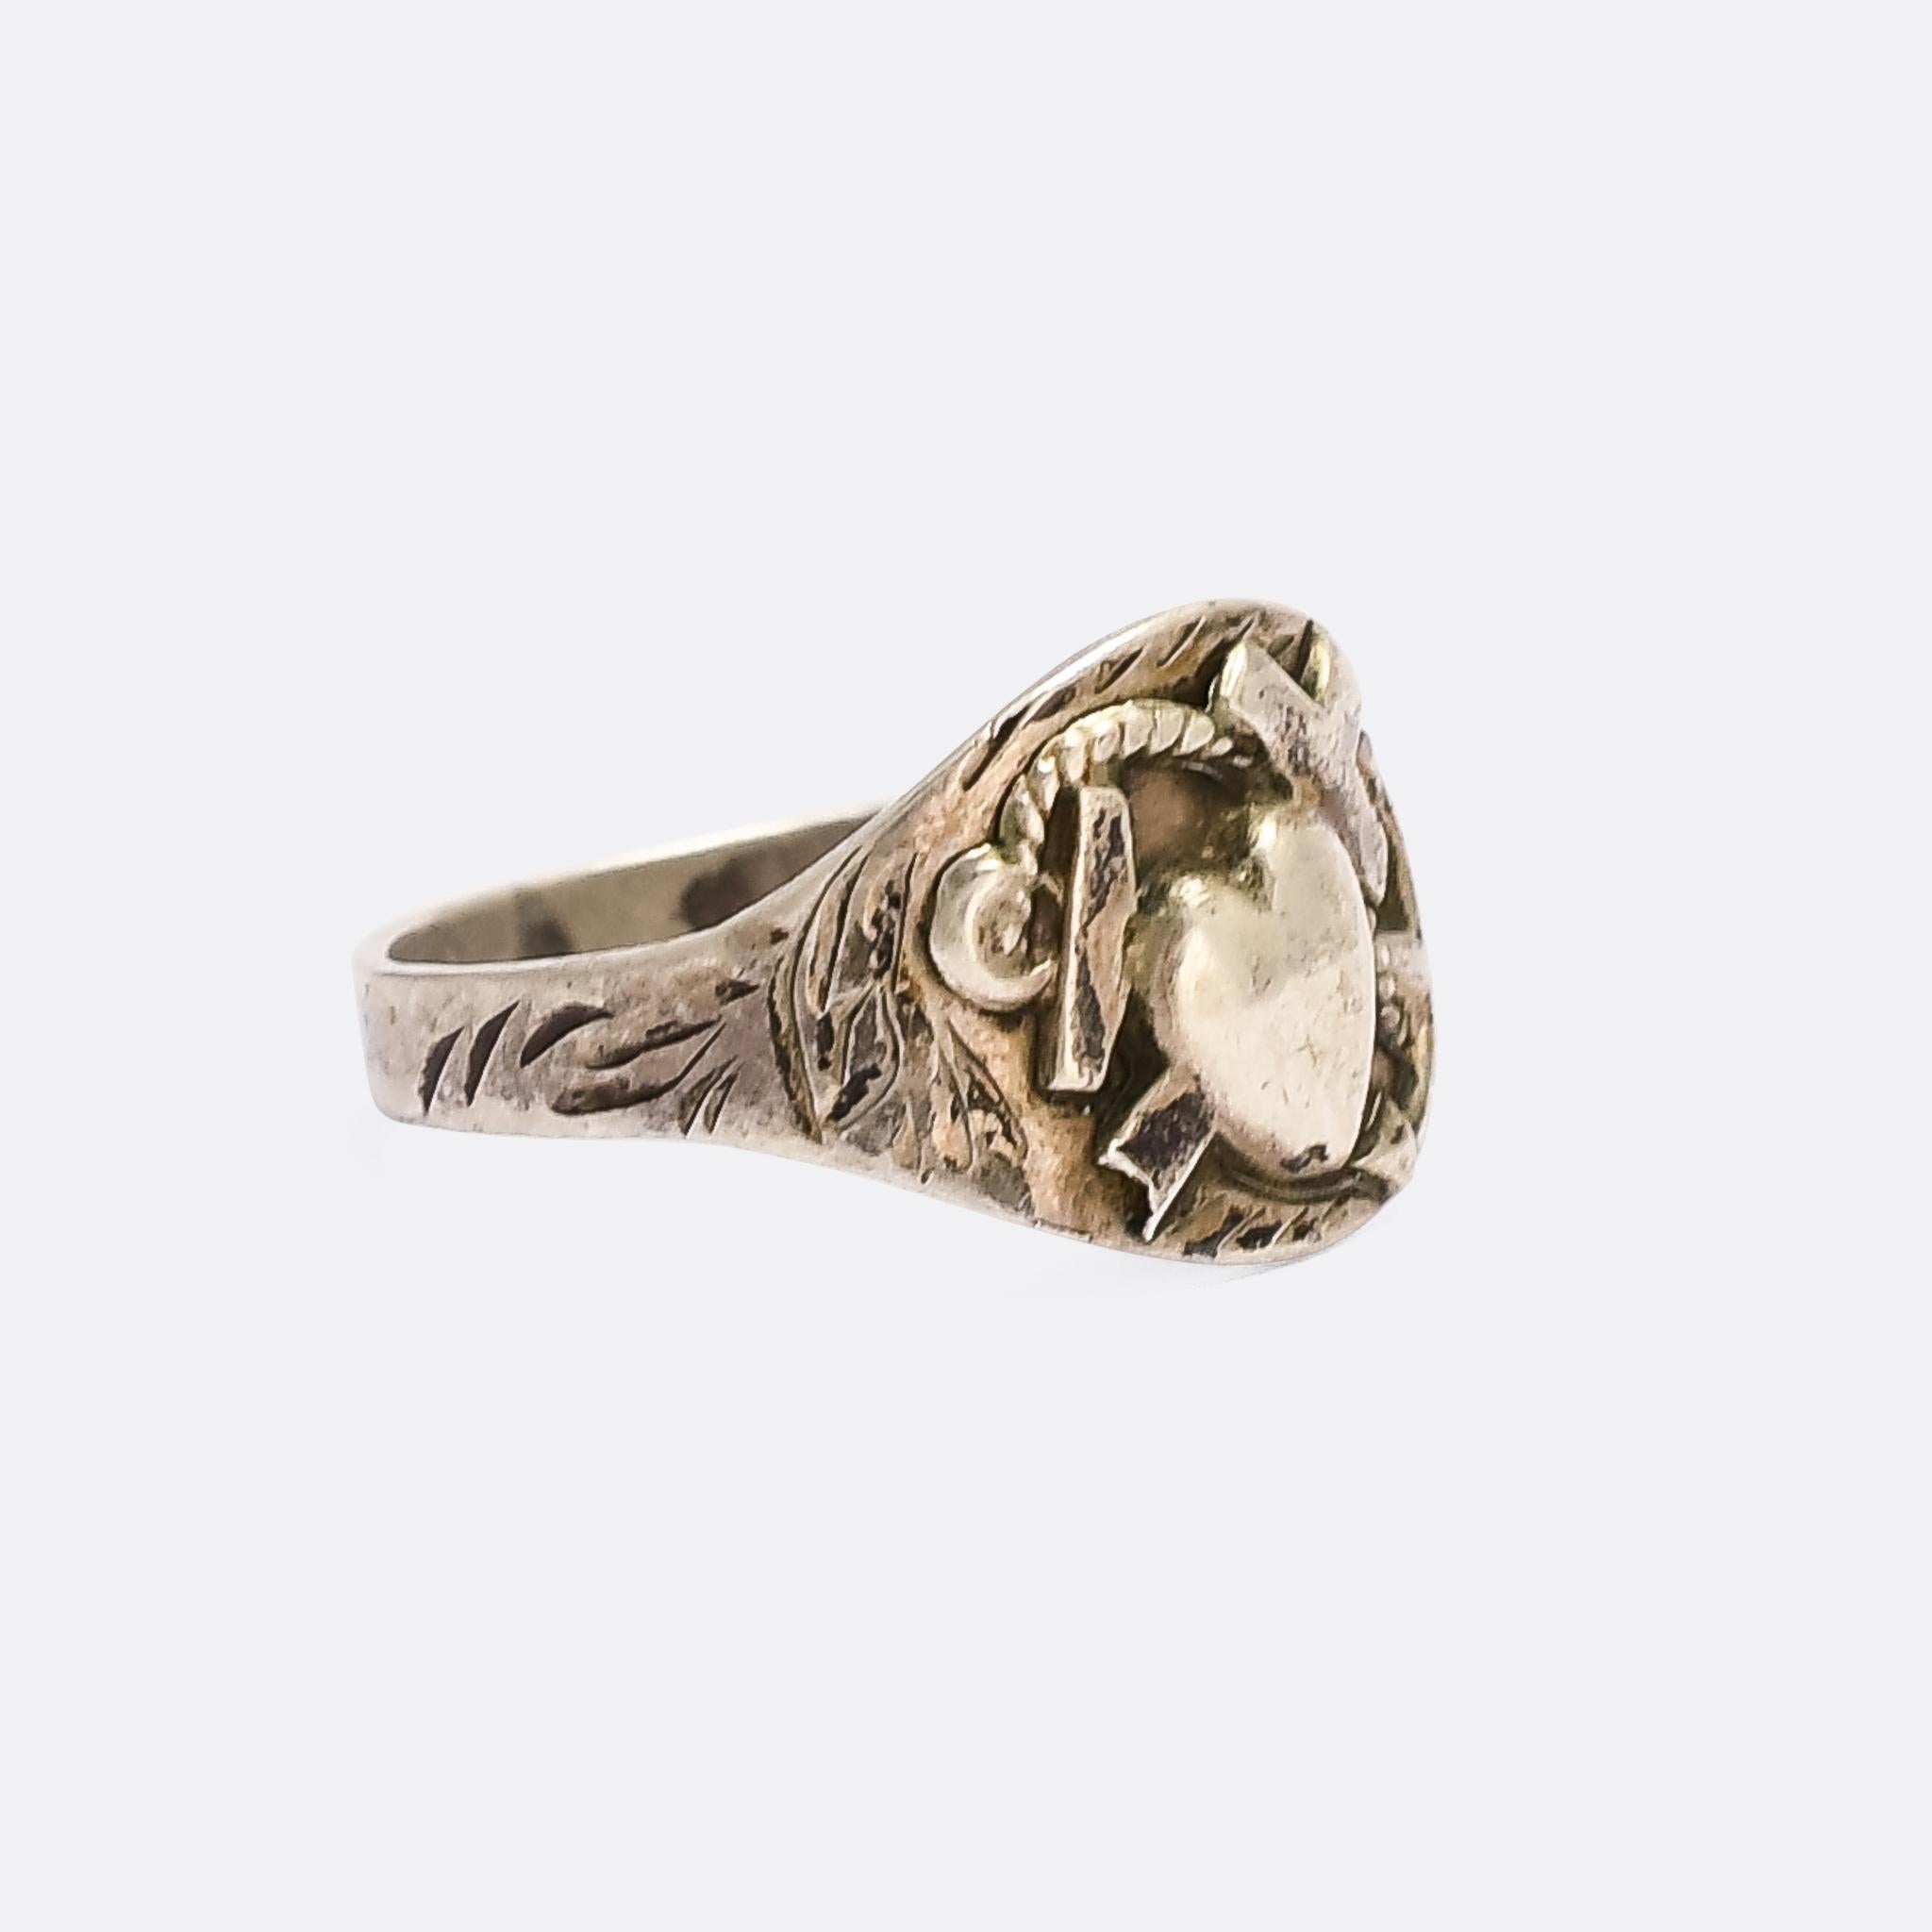 An unusual, and quite charming, antique signet ring with the classic 